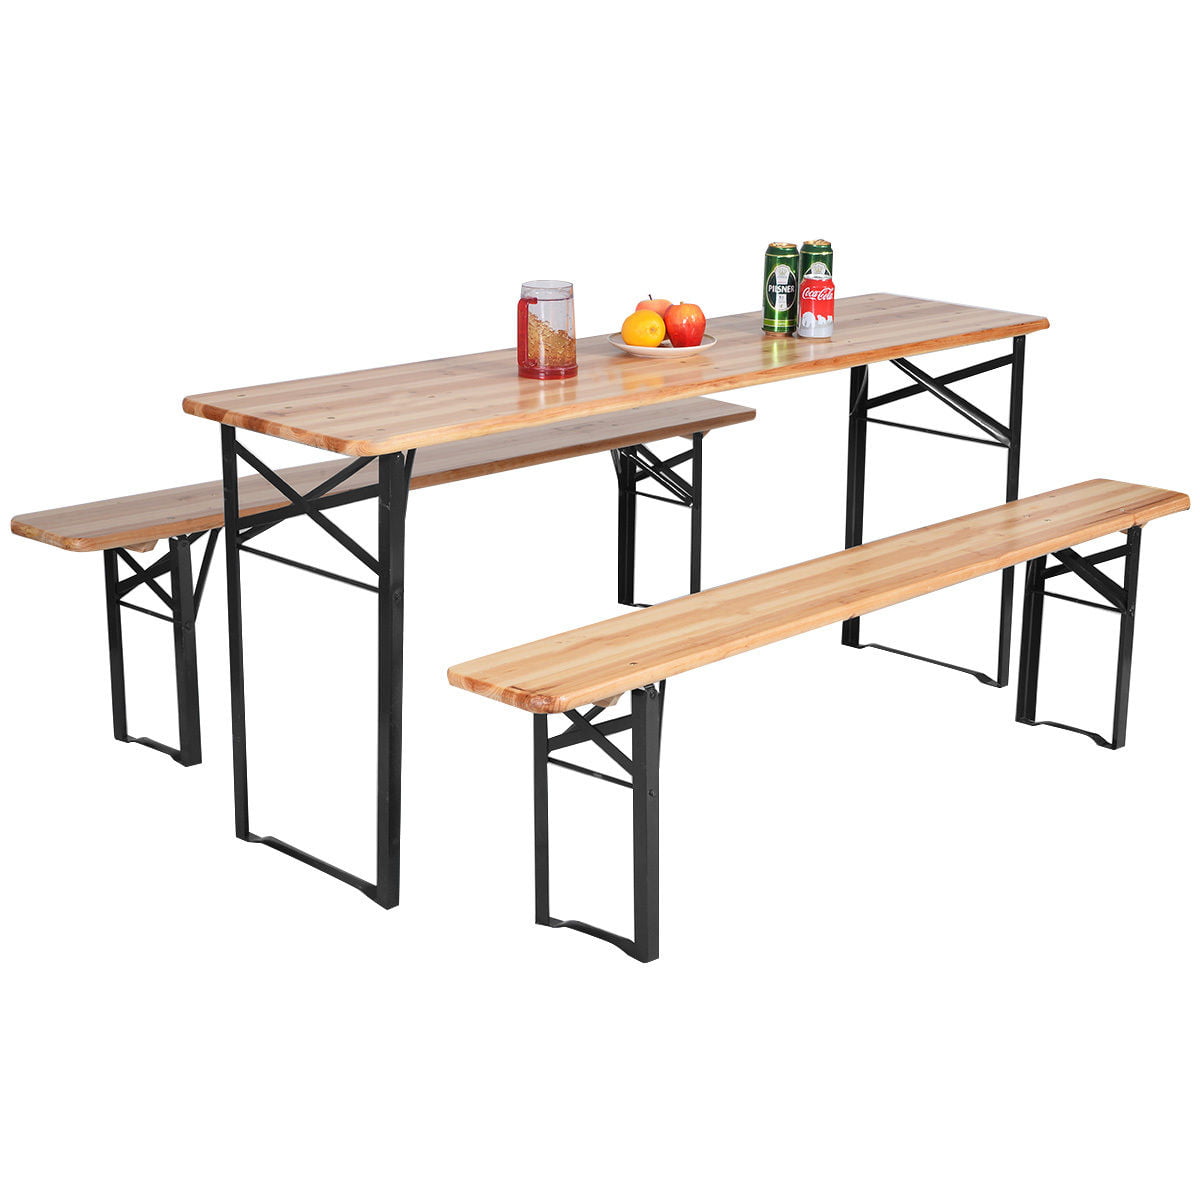 3 Sizes Outdoor Portable Folding Picnic BBQ Table Garden Storage Dining Table 